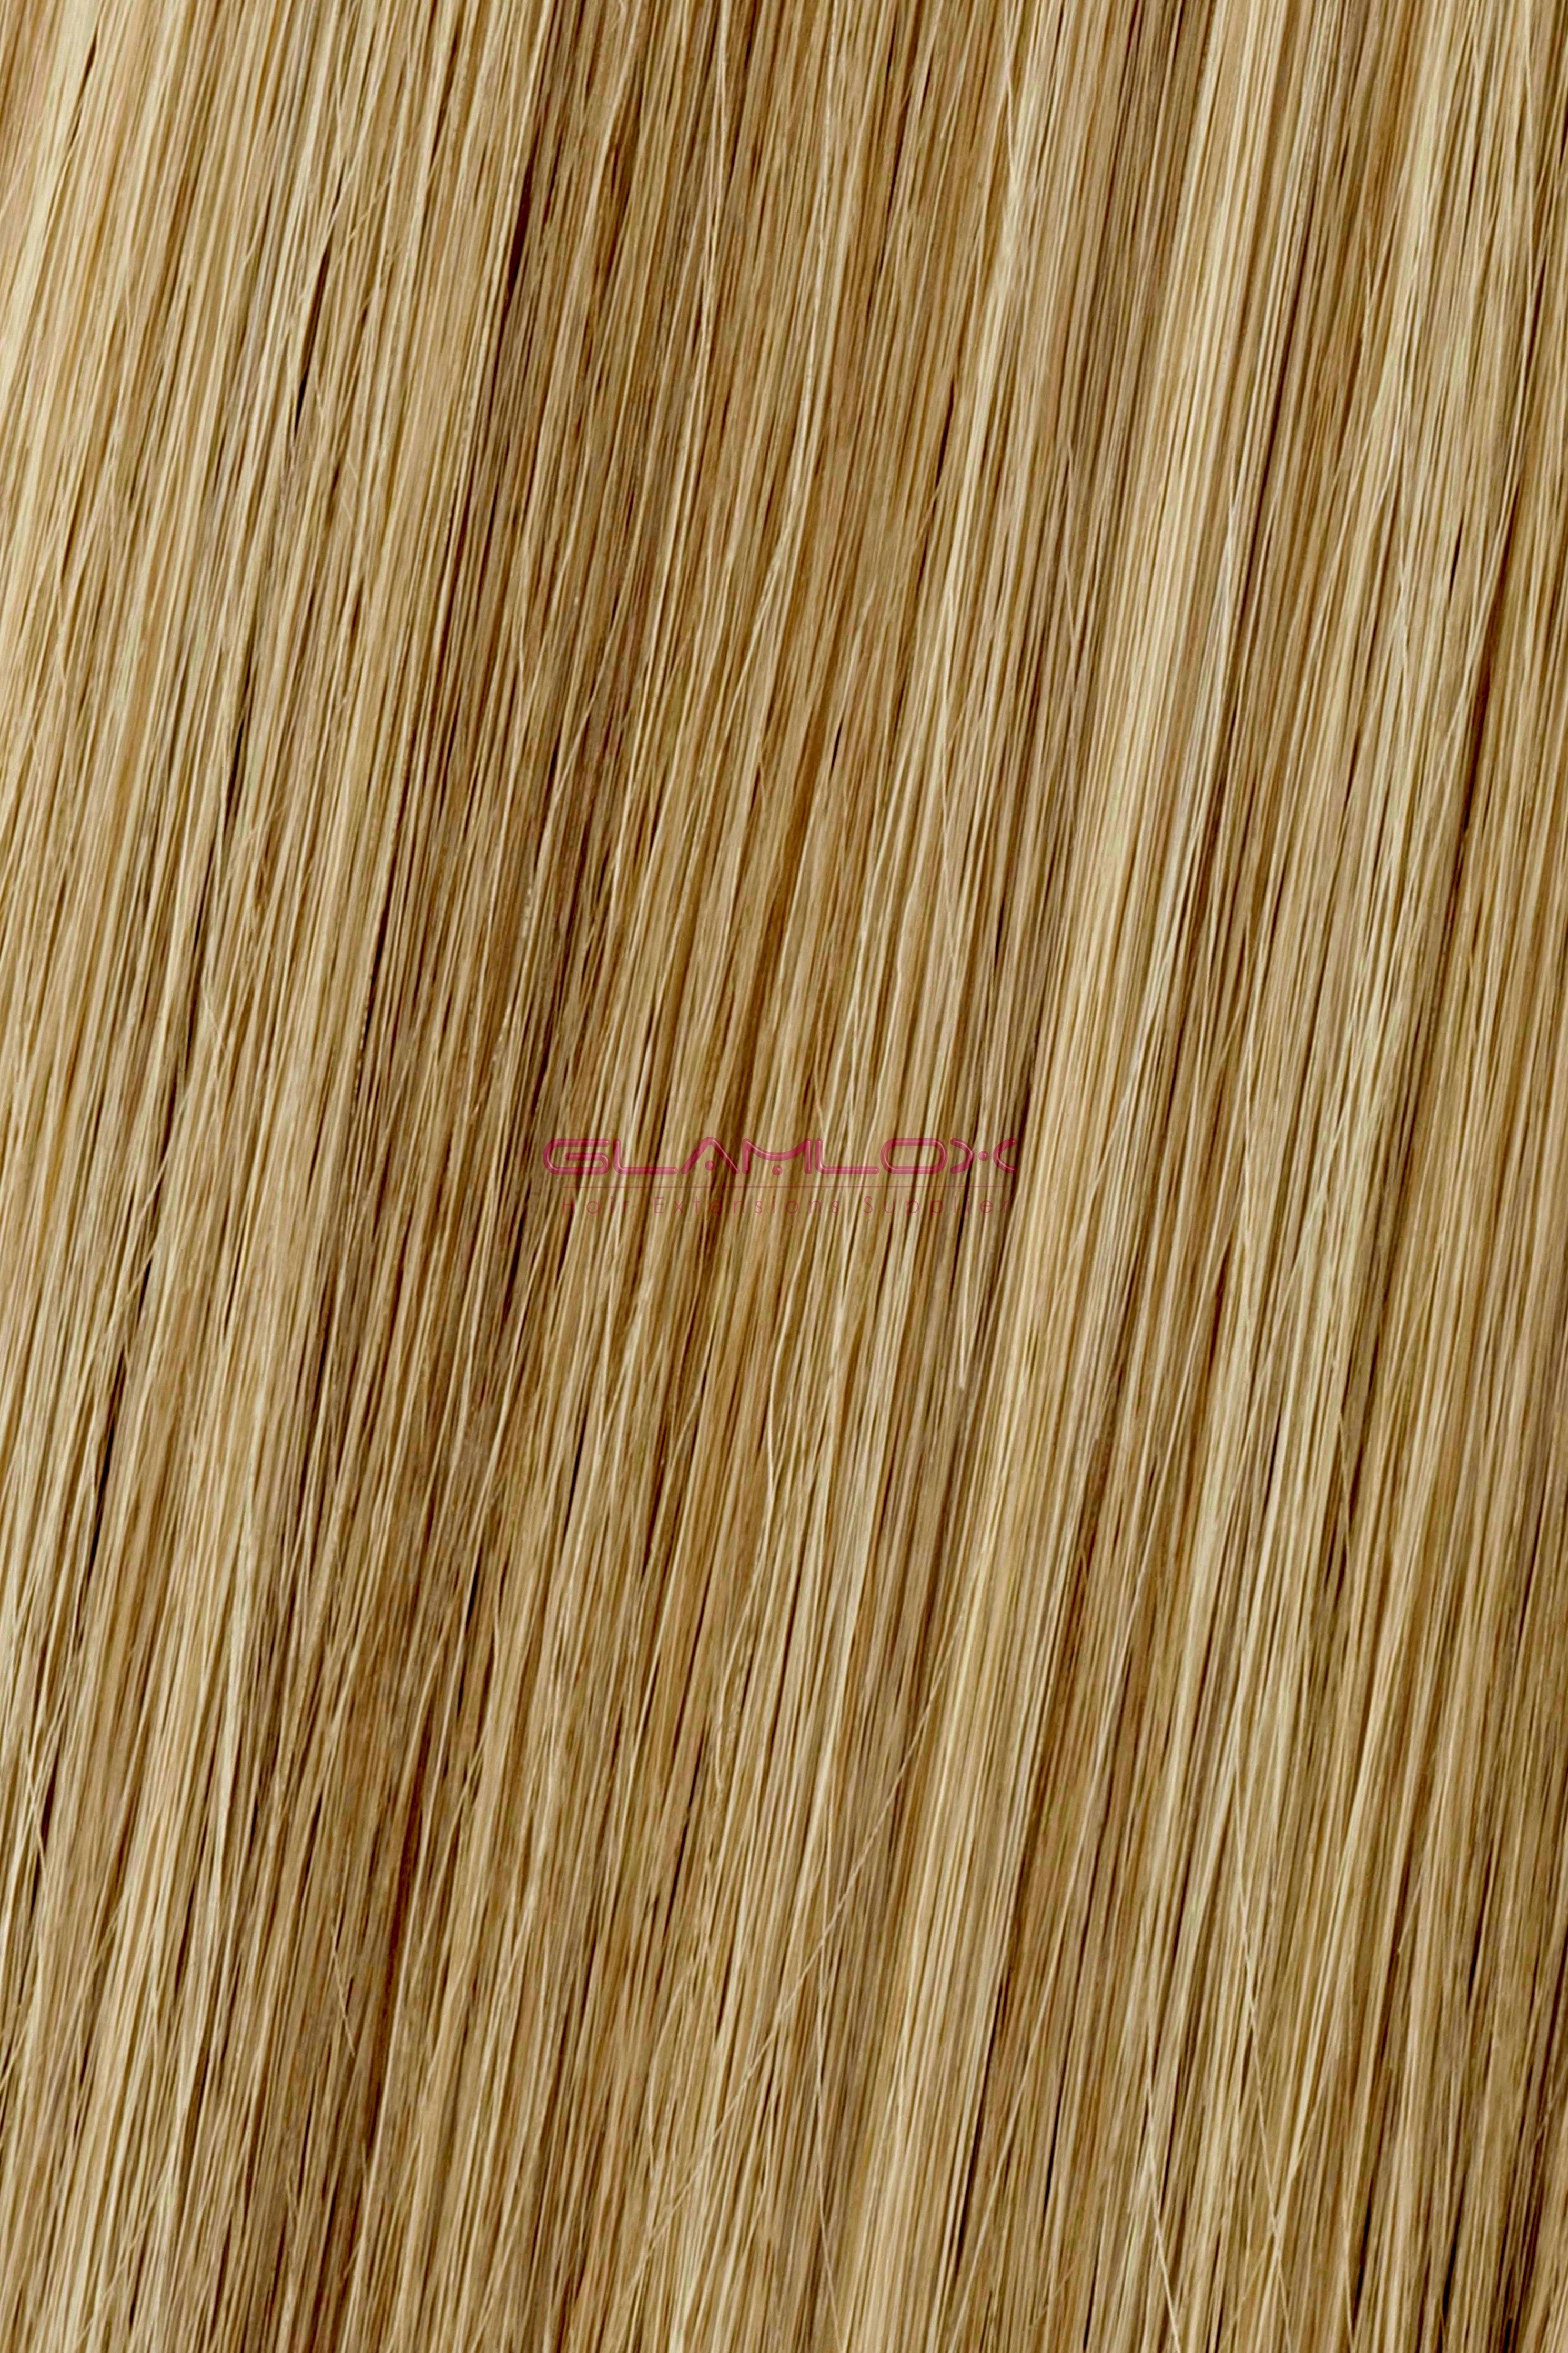 18" - 19" Nano Ring Hair Extensions - Russian Mongolian Double Drawn Remy Human Hair - 20 Strands